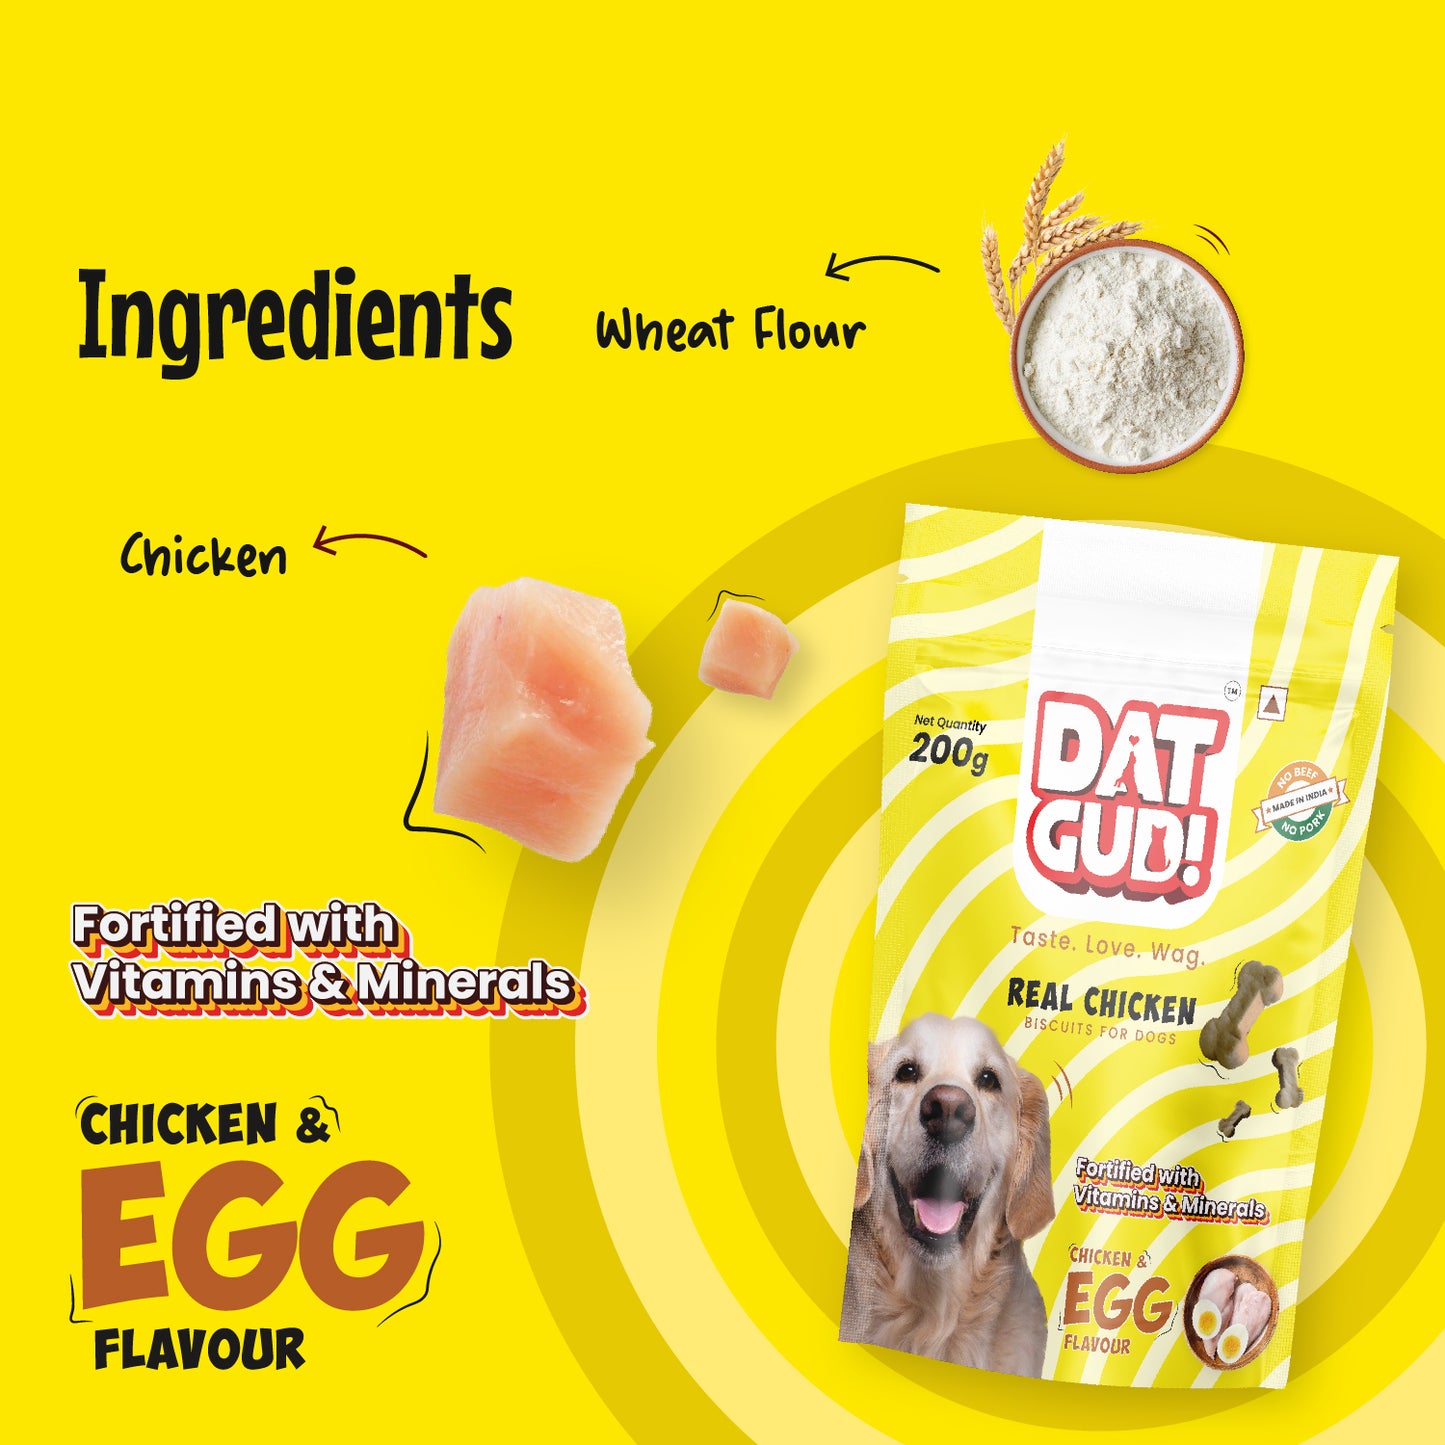 Key ingredients in DatGud Real Chicken Biscuits in egg flavor - Wheat flour and chicken. 